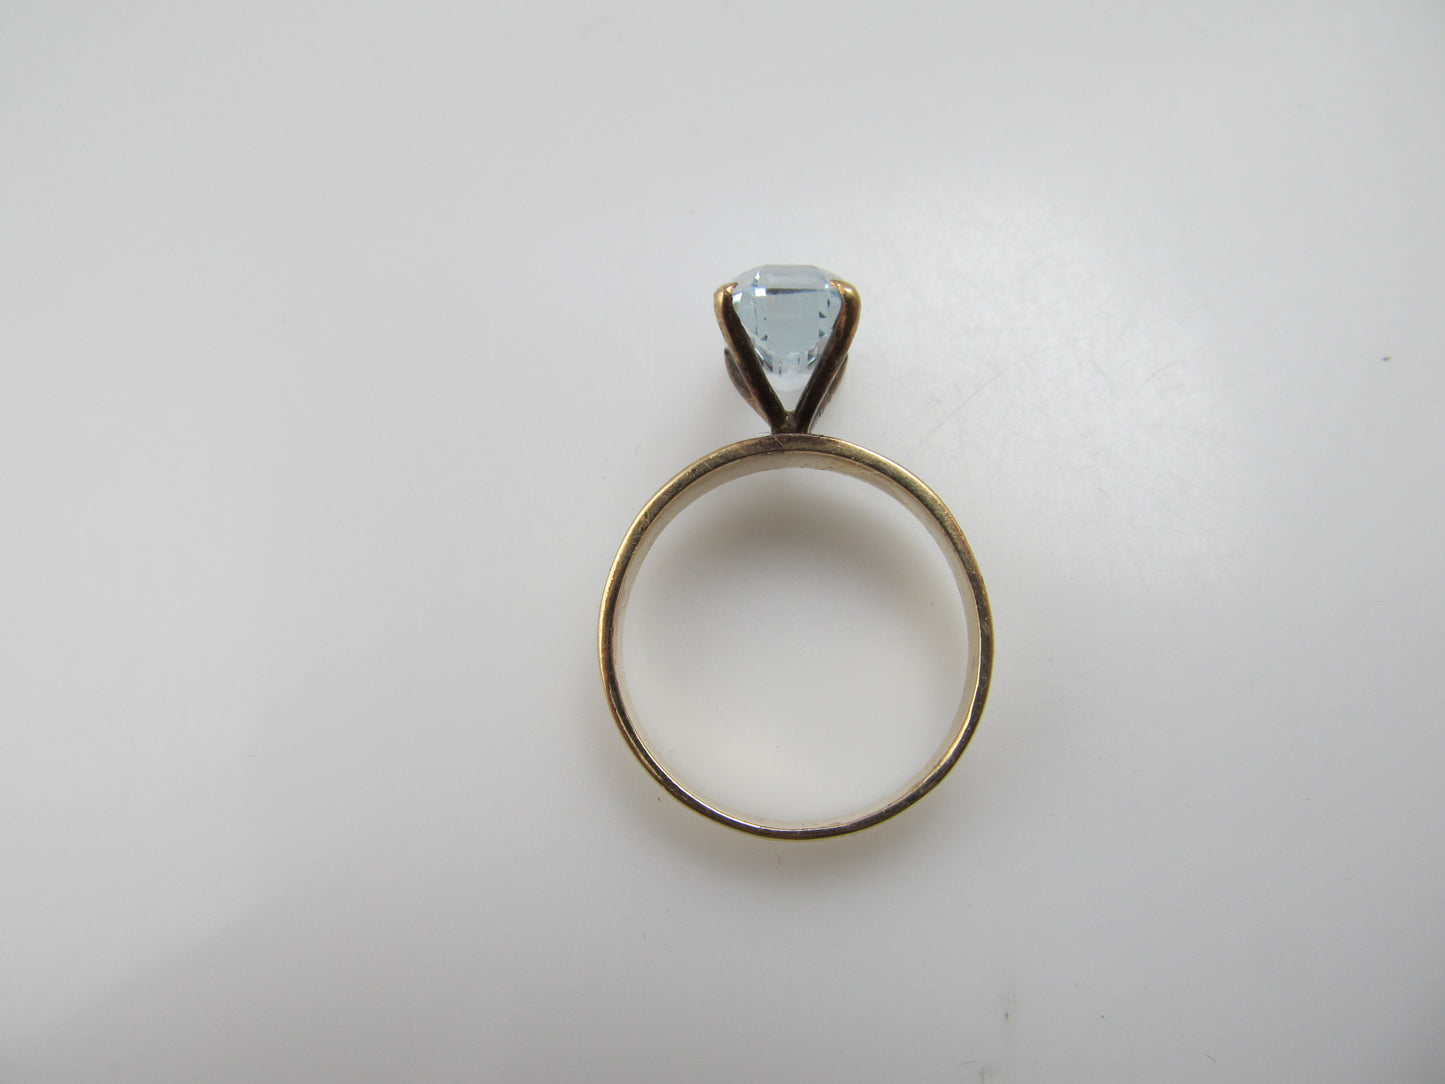 Vintage 14k gold ring with a 2.25ct aquamarine